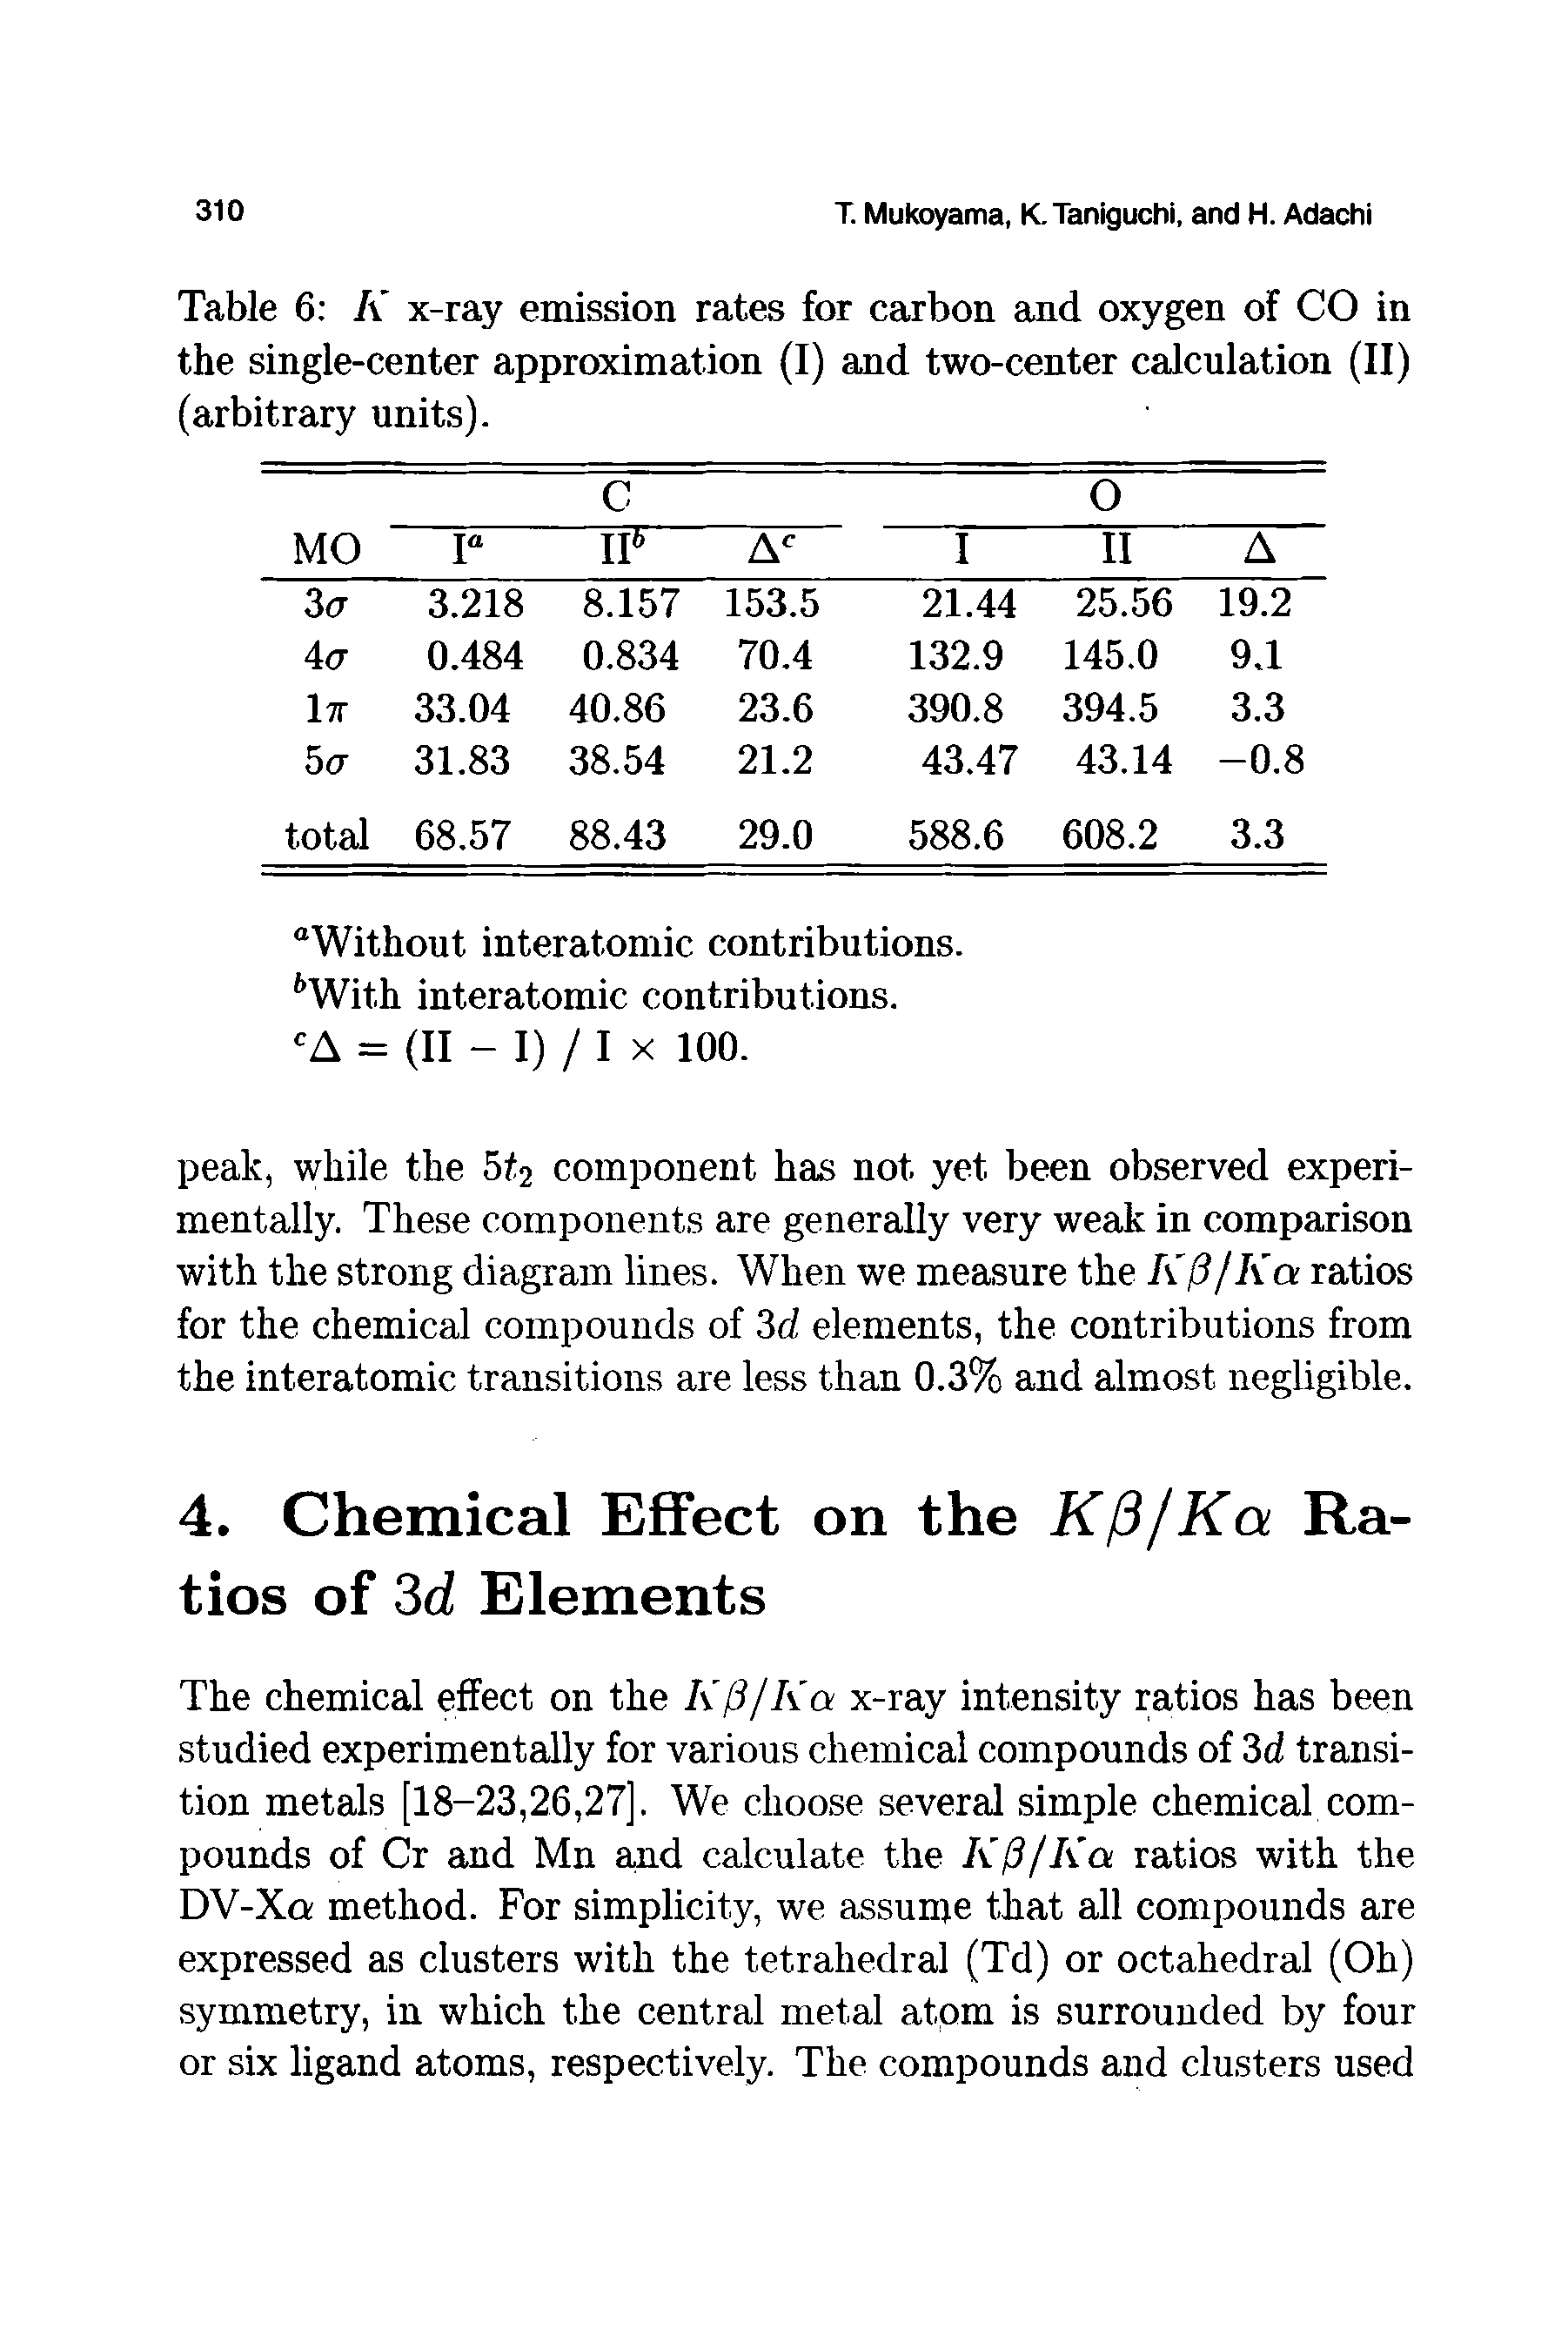 Table 6 K x-ray emission rates for carbon and oxygen of CO in the single-center approximation (I) and two-center calculation (II) (arbitrary units).